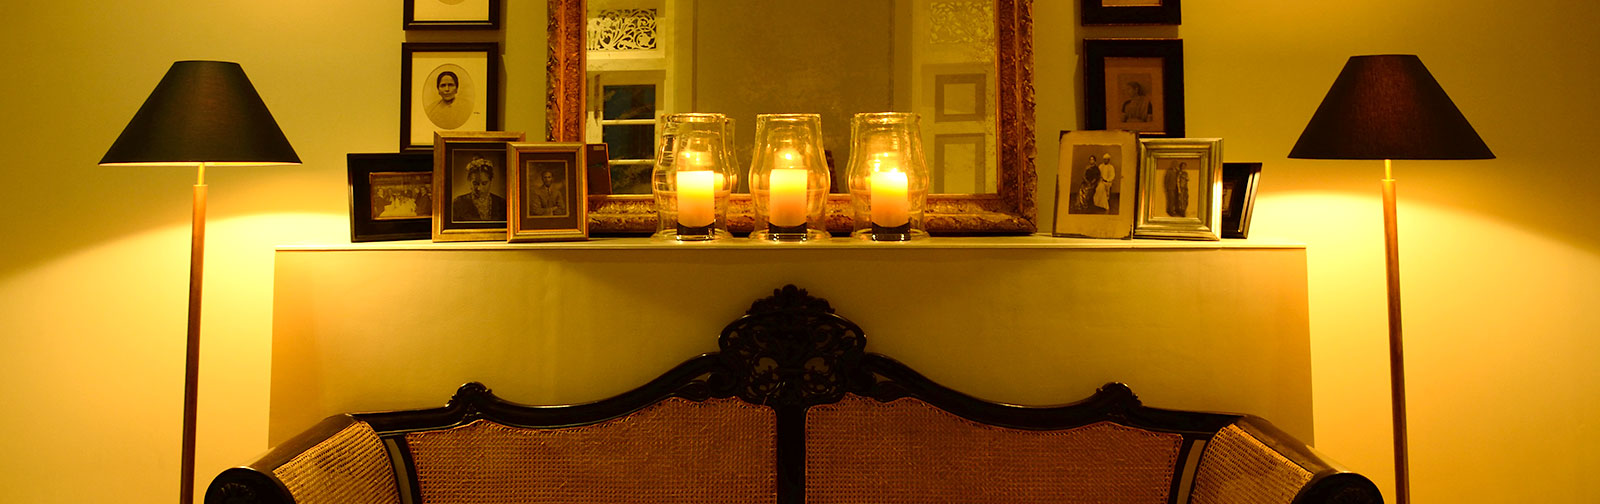 Framed photos on a mantlepiece above a couch with lighted lamps on either side at Maniumpathy Boutique Hotel, Colombo, Sri Lanka